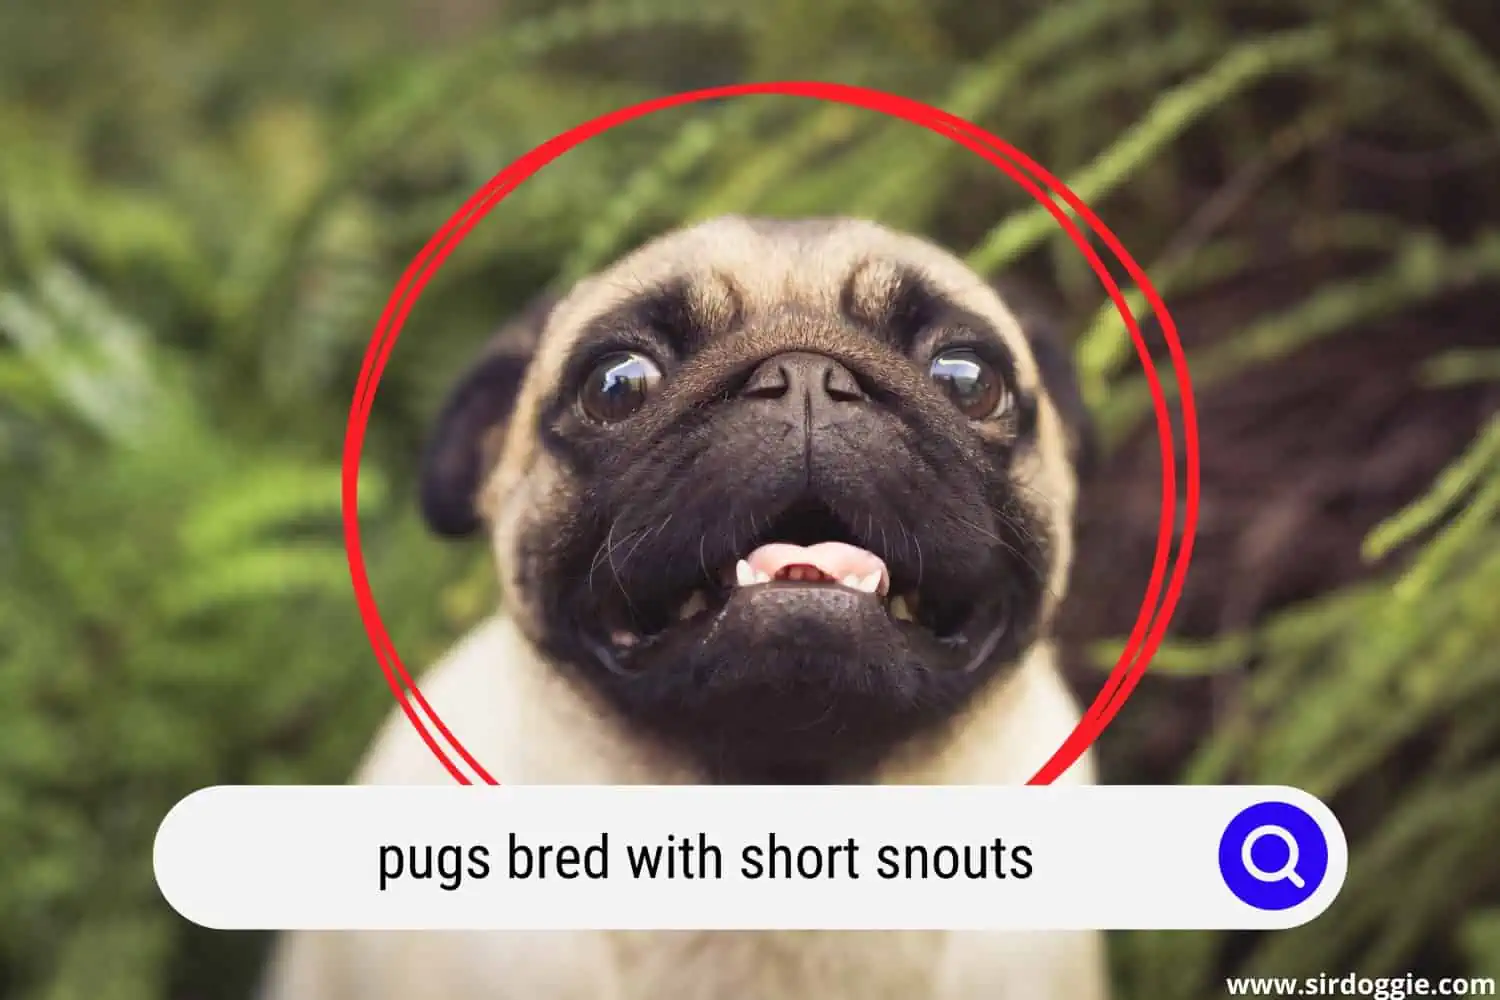 pugs bred with short snouts